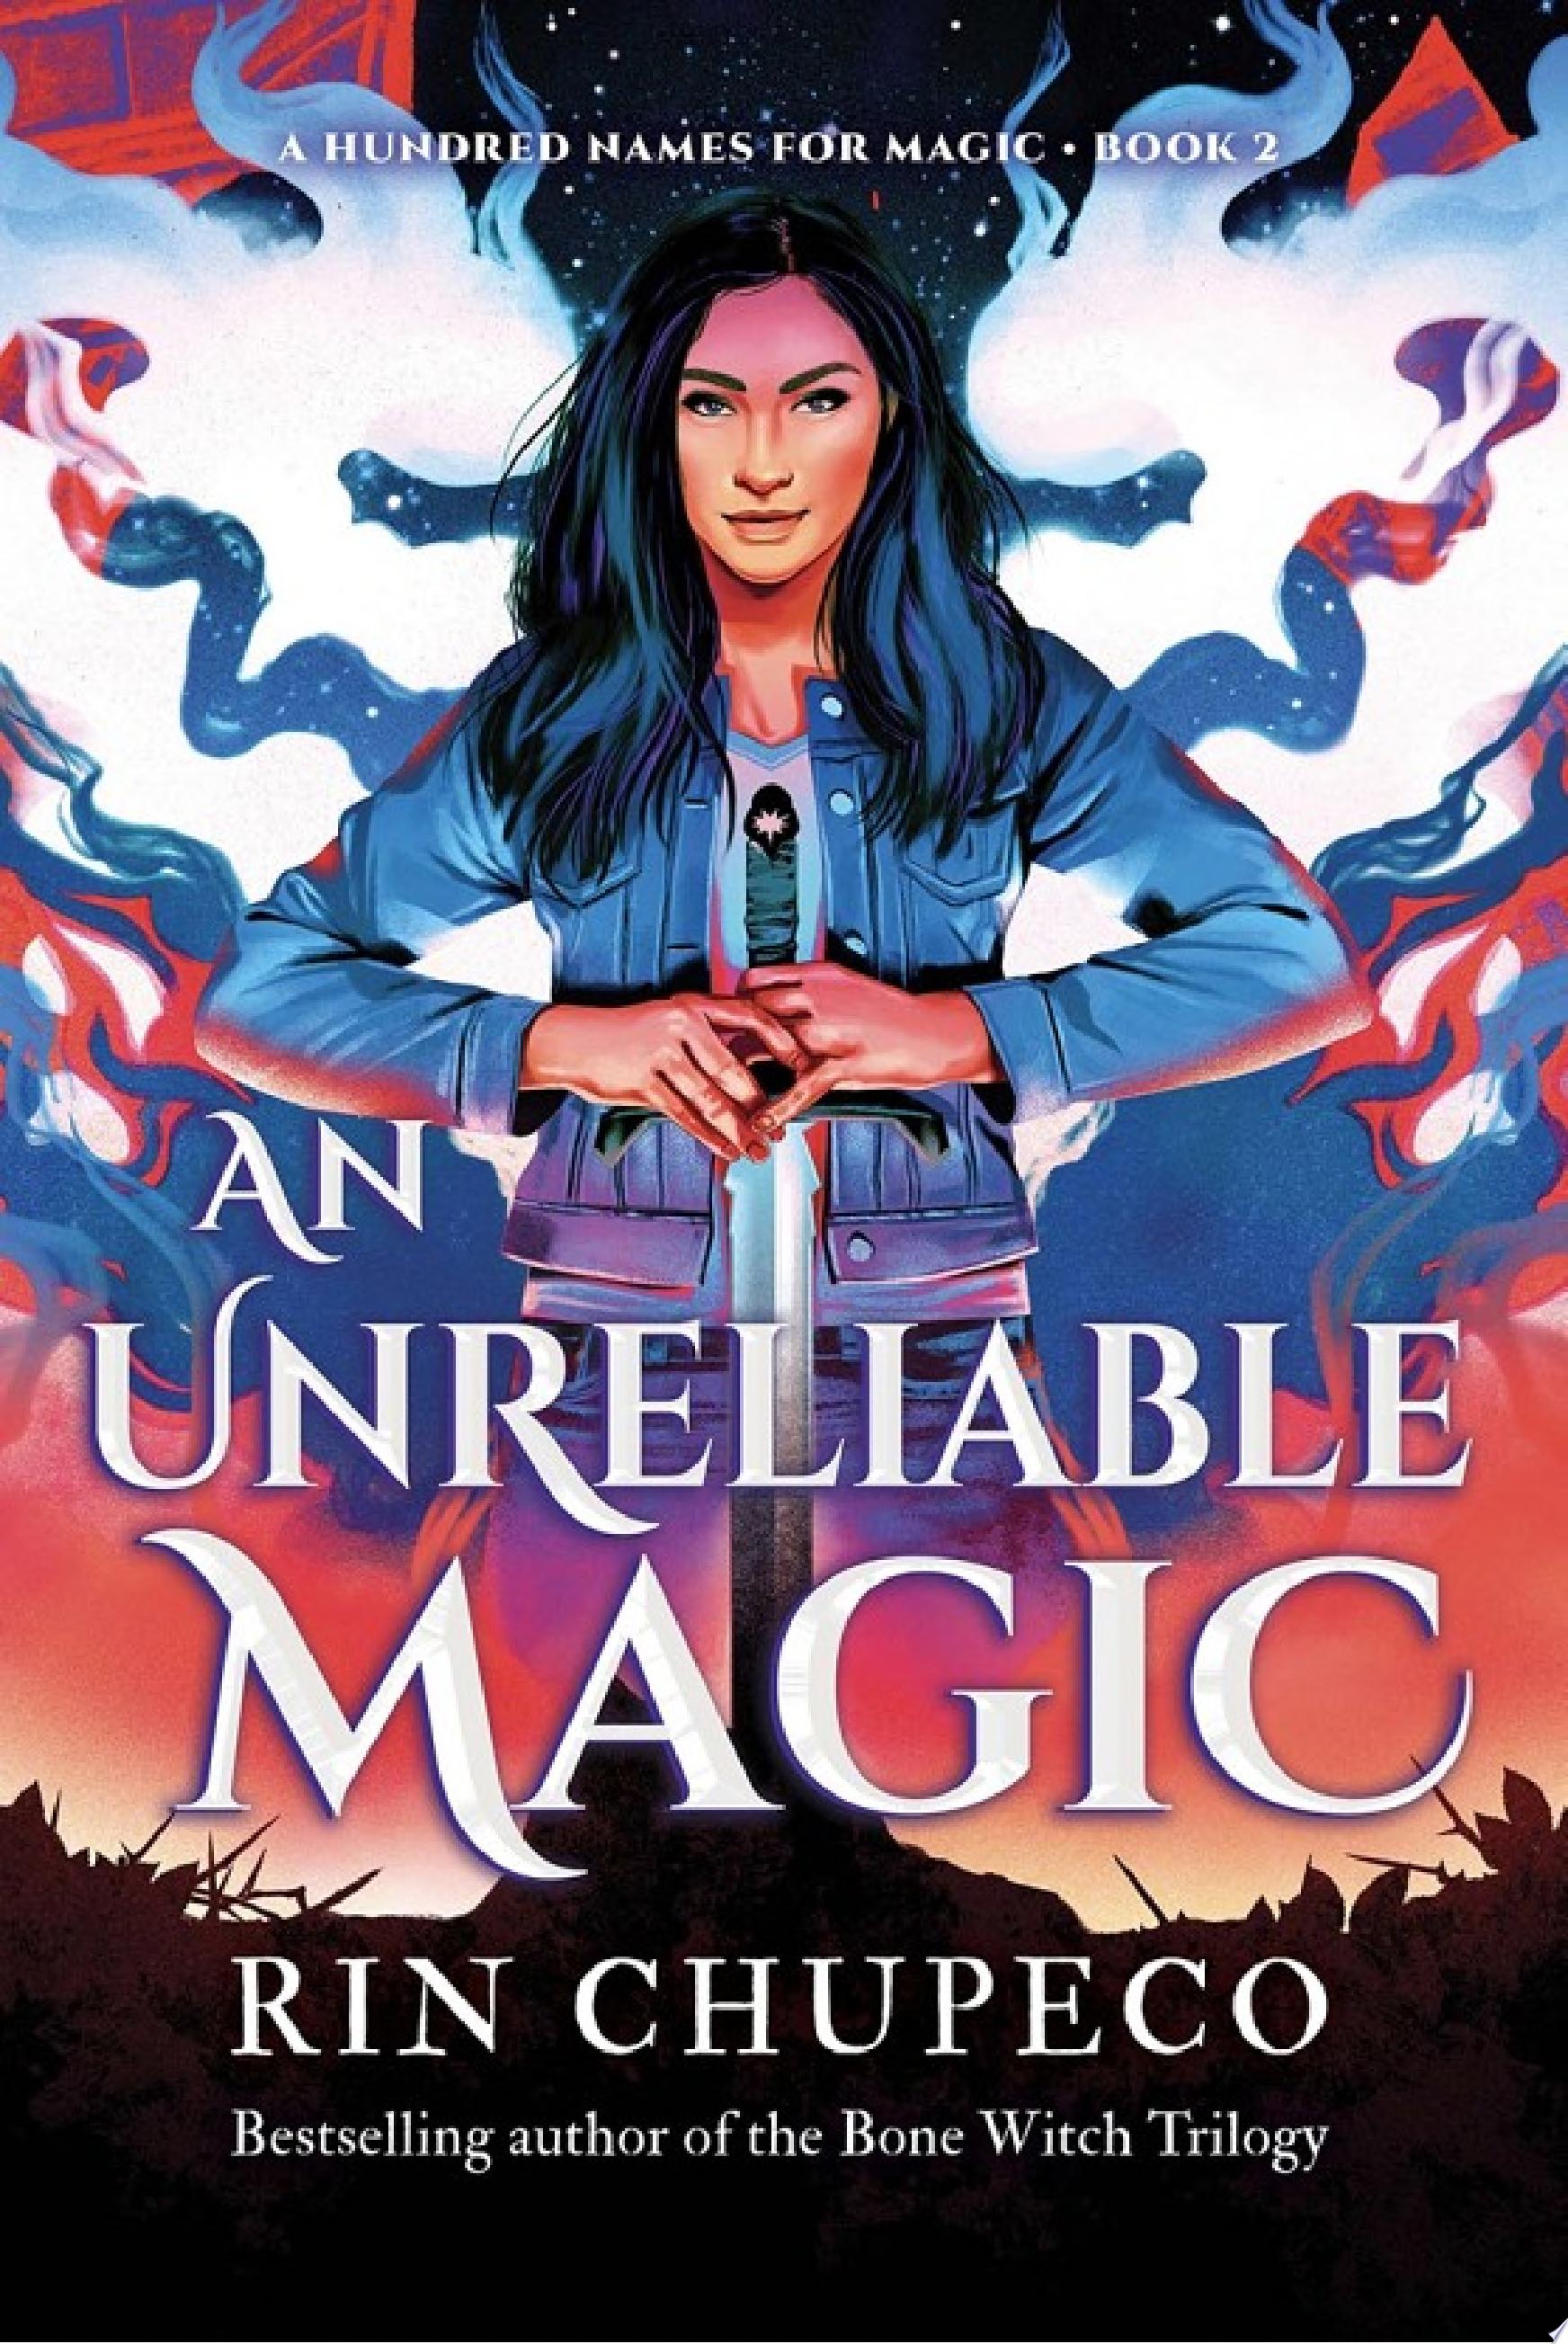 Image for "An Unreliable Magic"